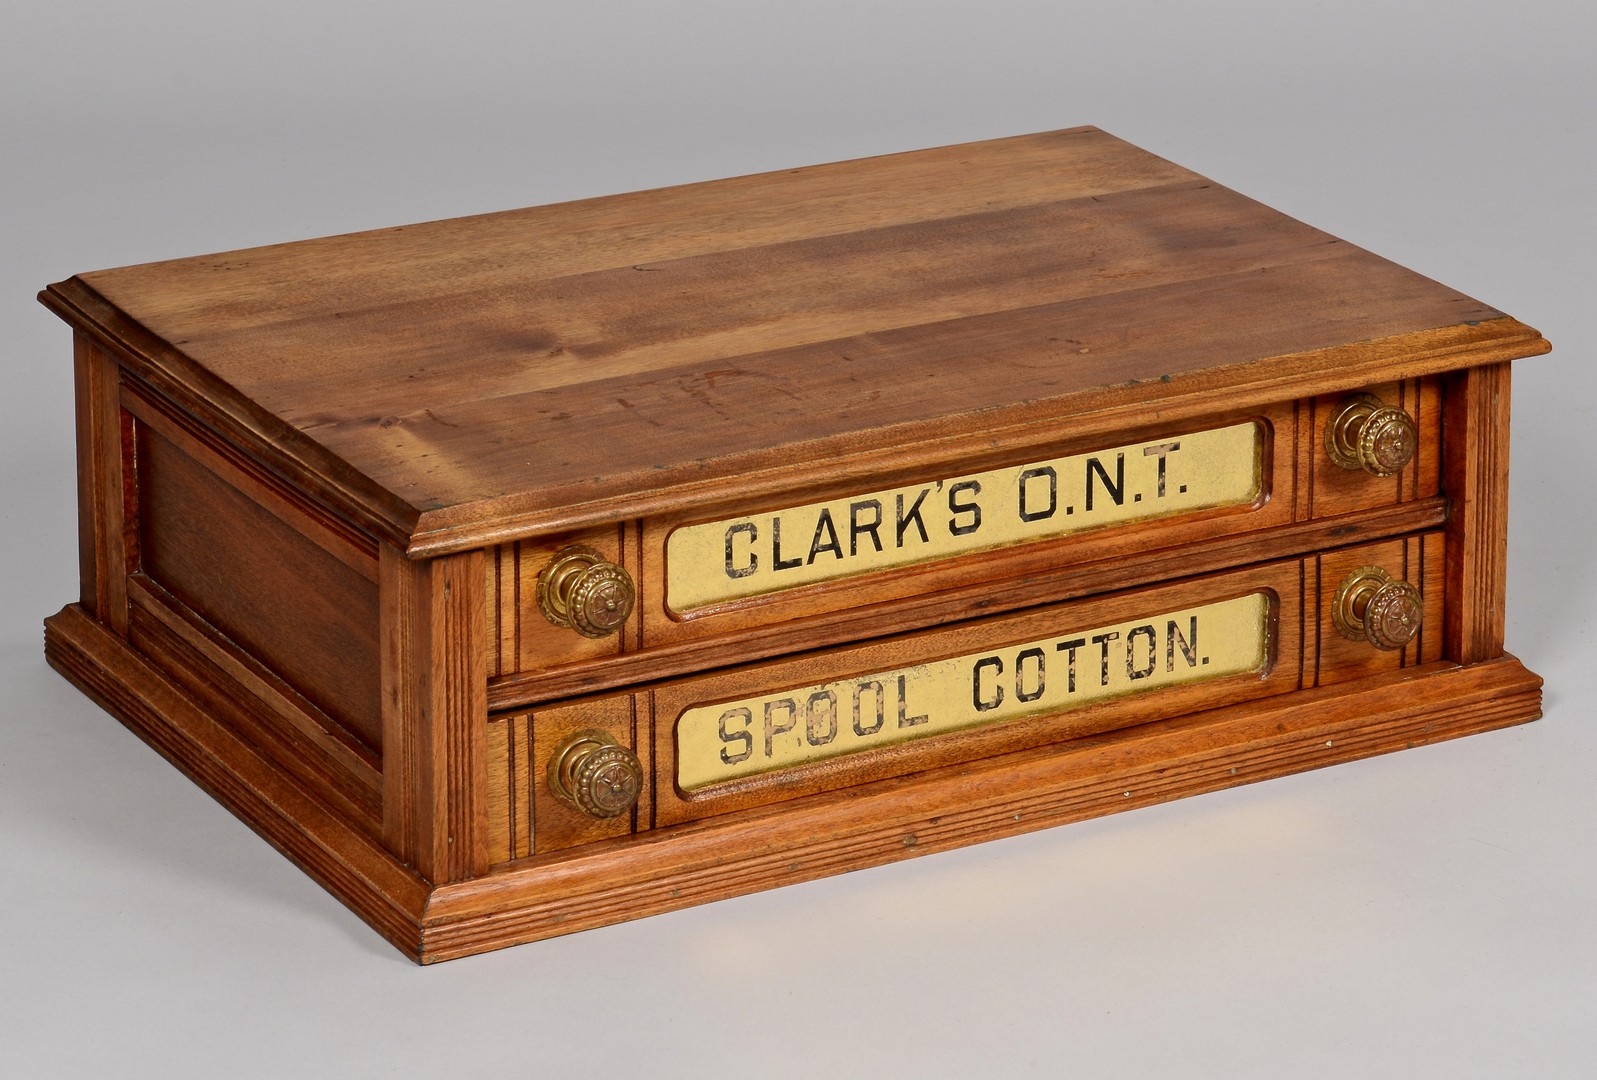 Lot 861: Two Clark's Advertising Spool Cabinets